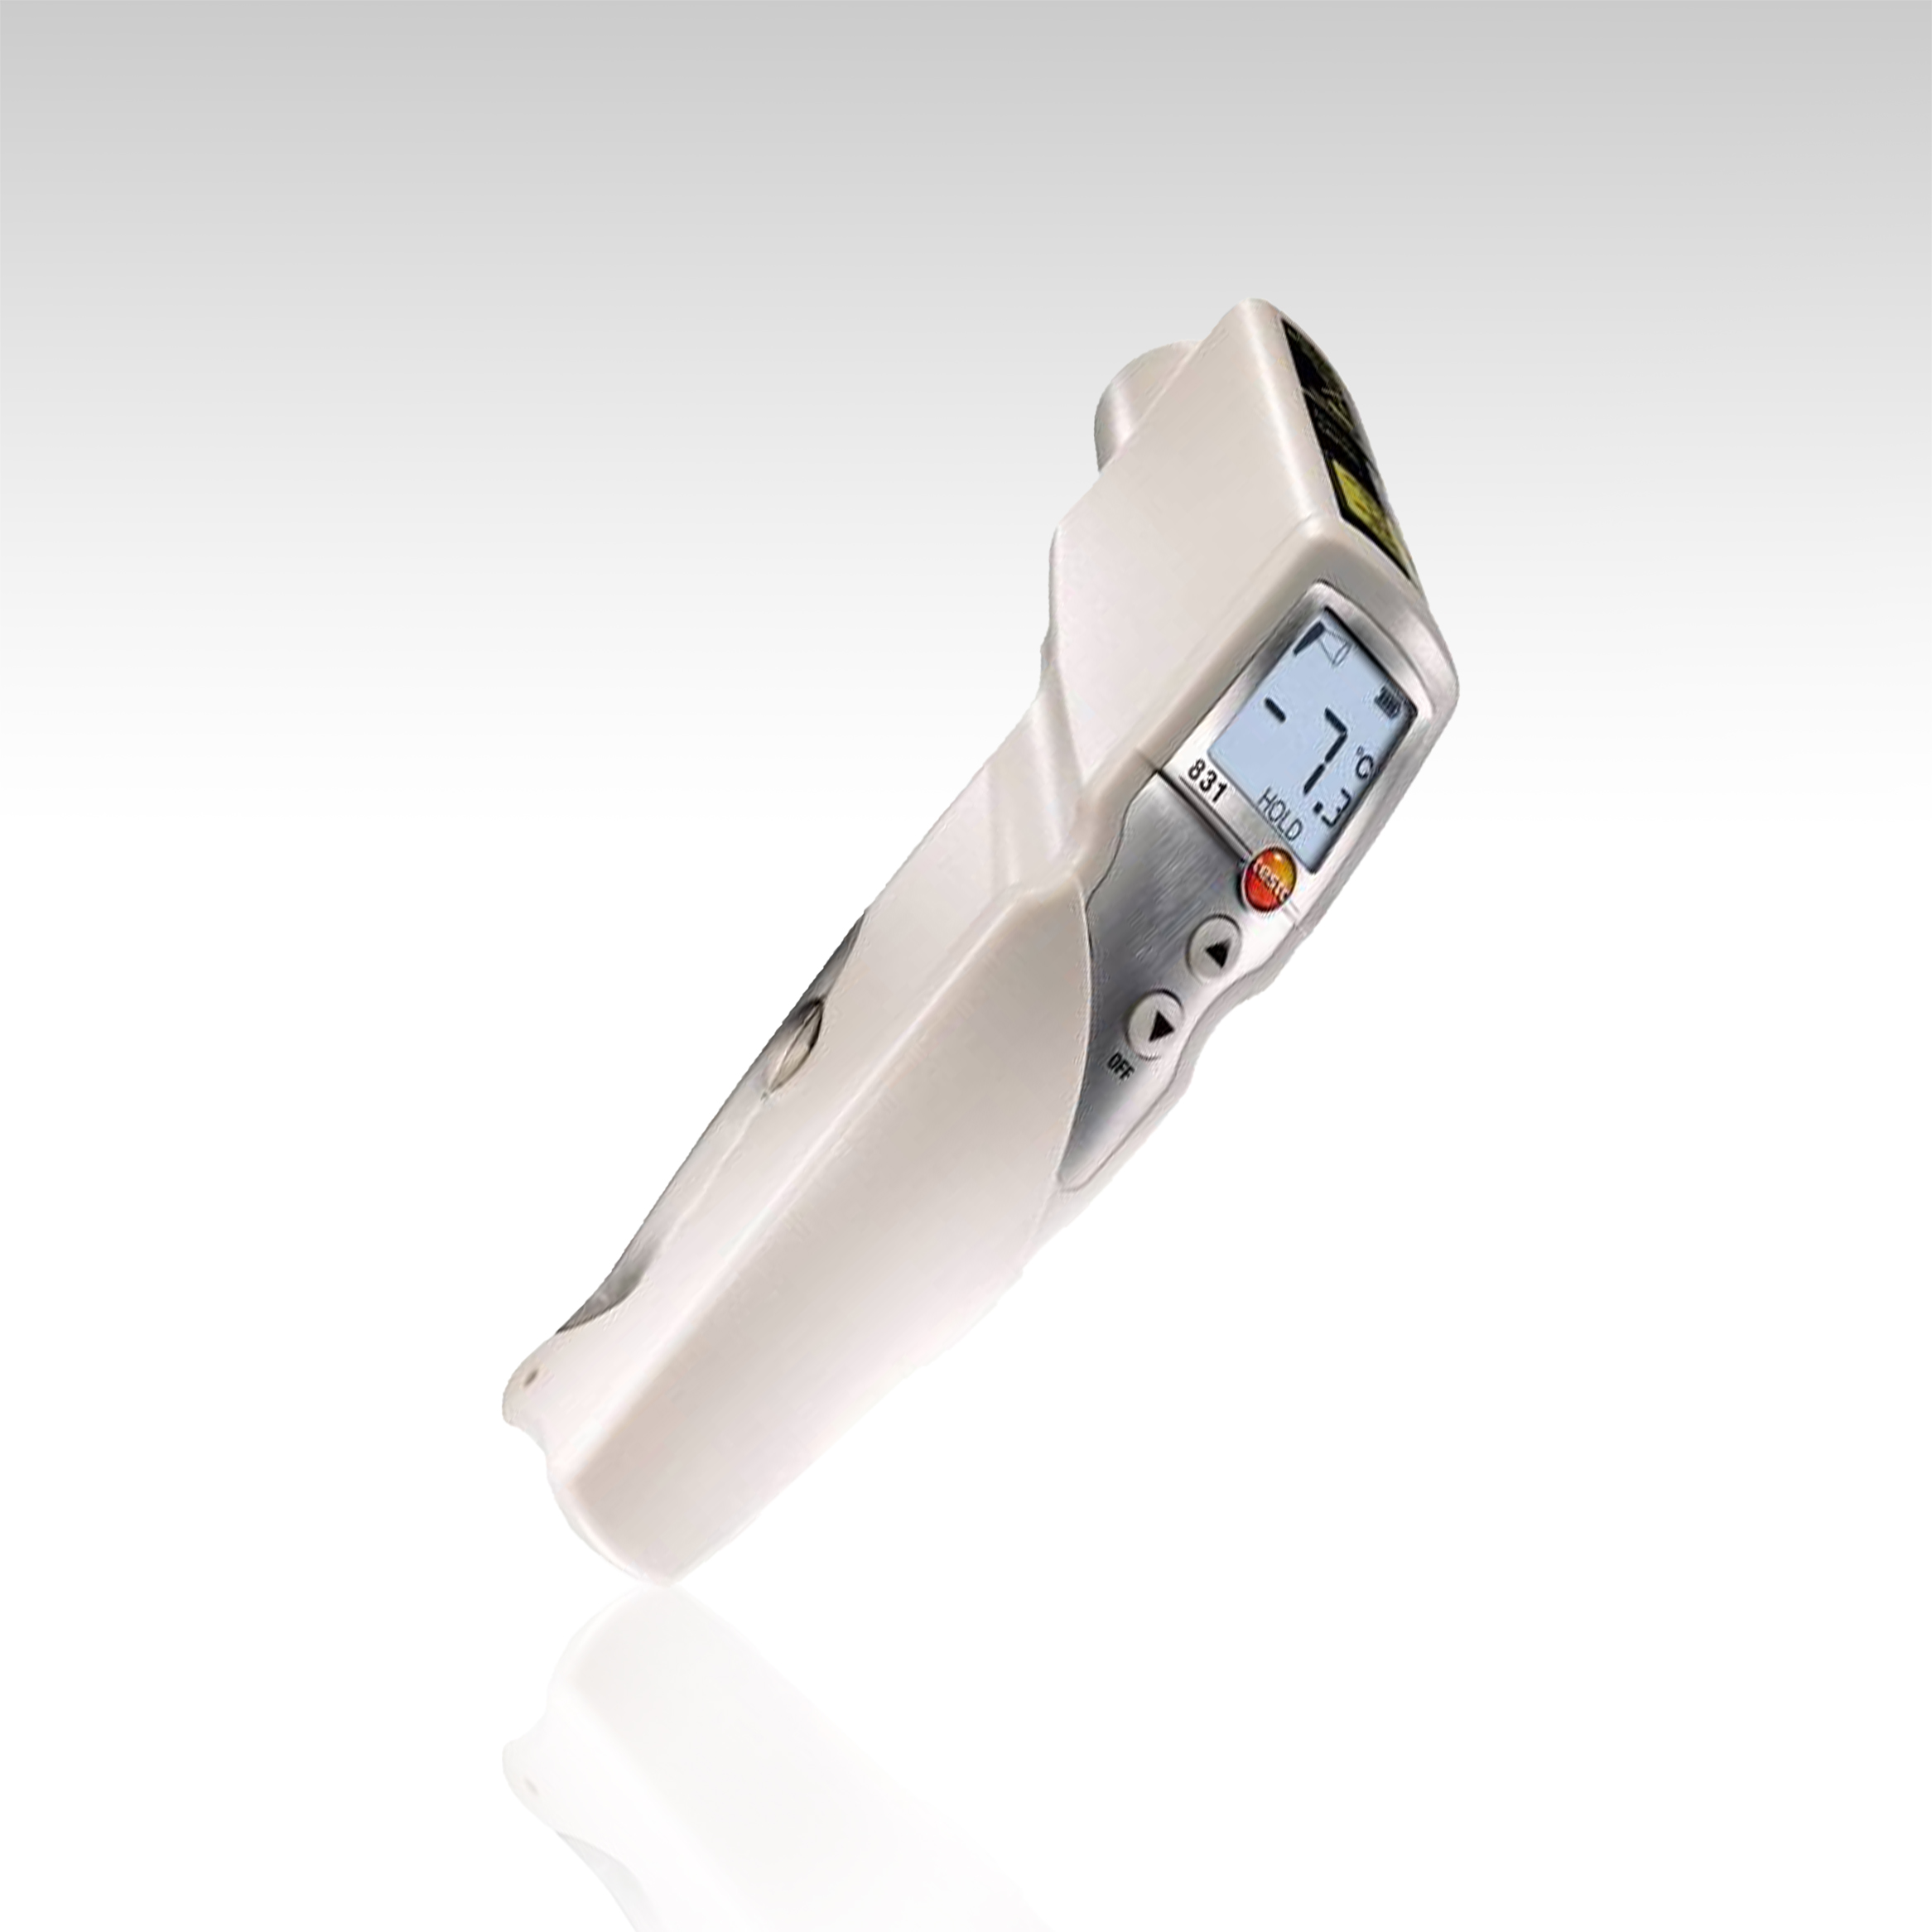 Testo 0560 8316 831 Infrared Thermometer for Food Service